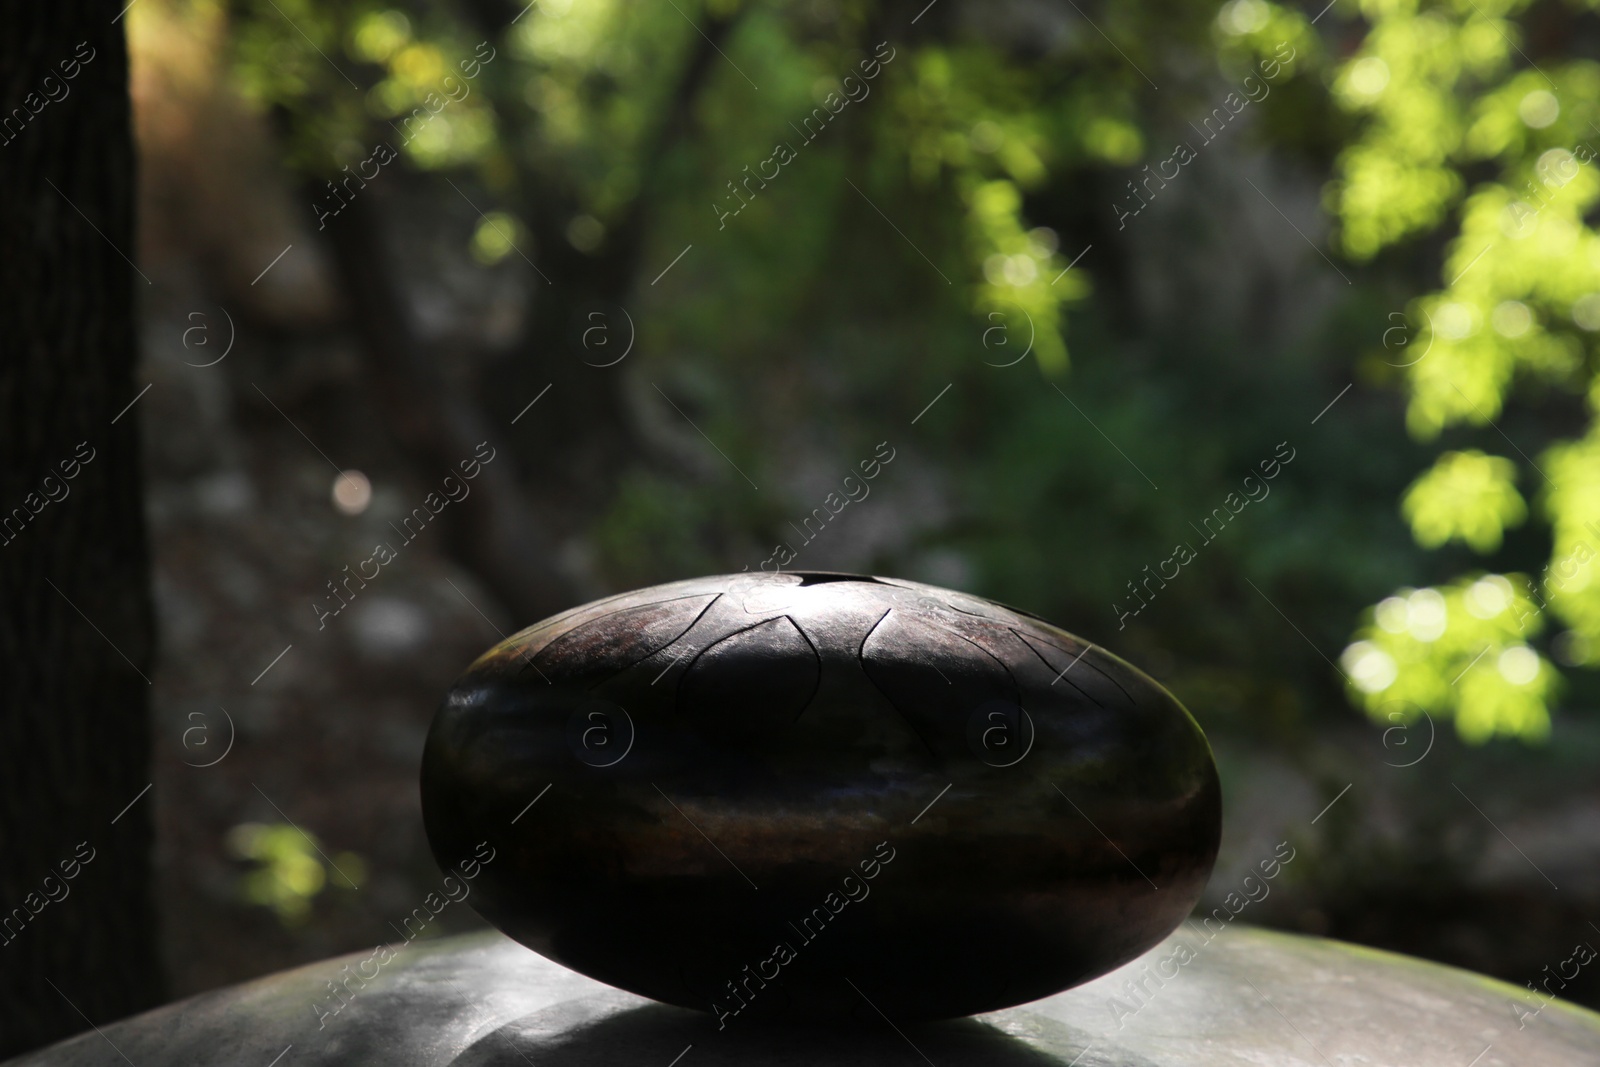 Photo of Steel tongue drum on stone outdoors. Percussion musical instrument